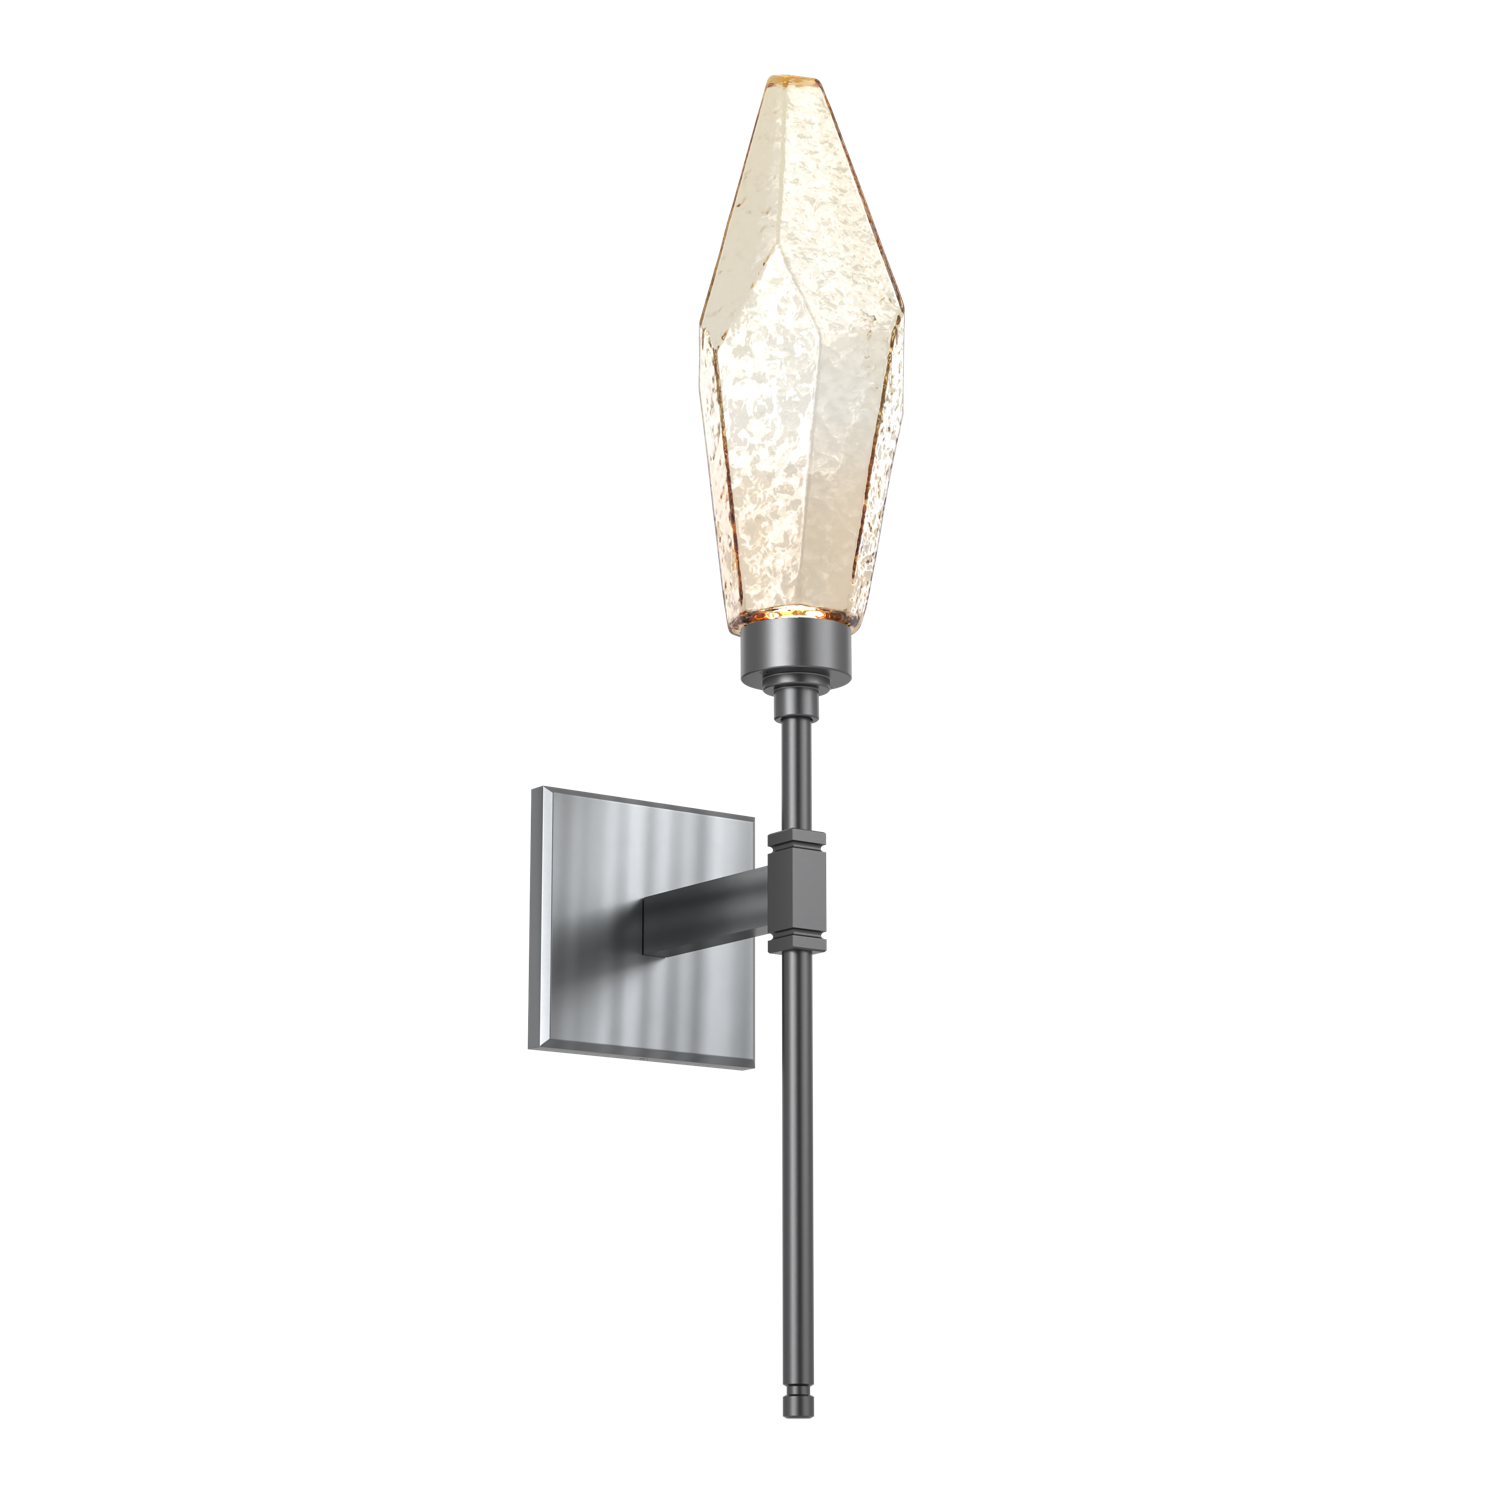 IDB0050-07-GM-CA-Hammerton-Studio-Rock-Crystal-belvedere-wall-sconce-with-gunmetal-finish-and-chilled-amber-blown-glass-shades-and-LED-lamping